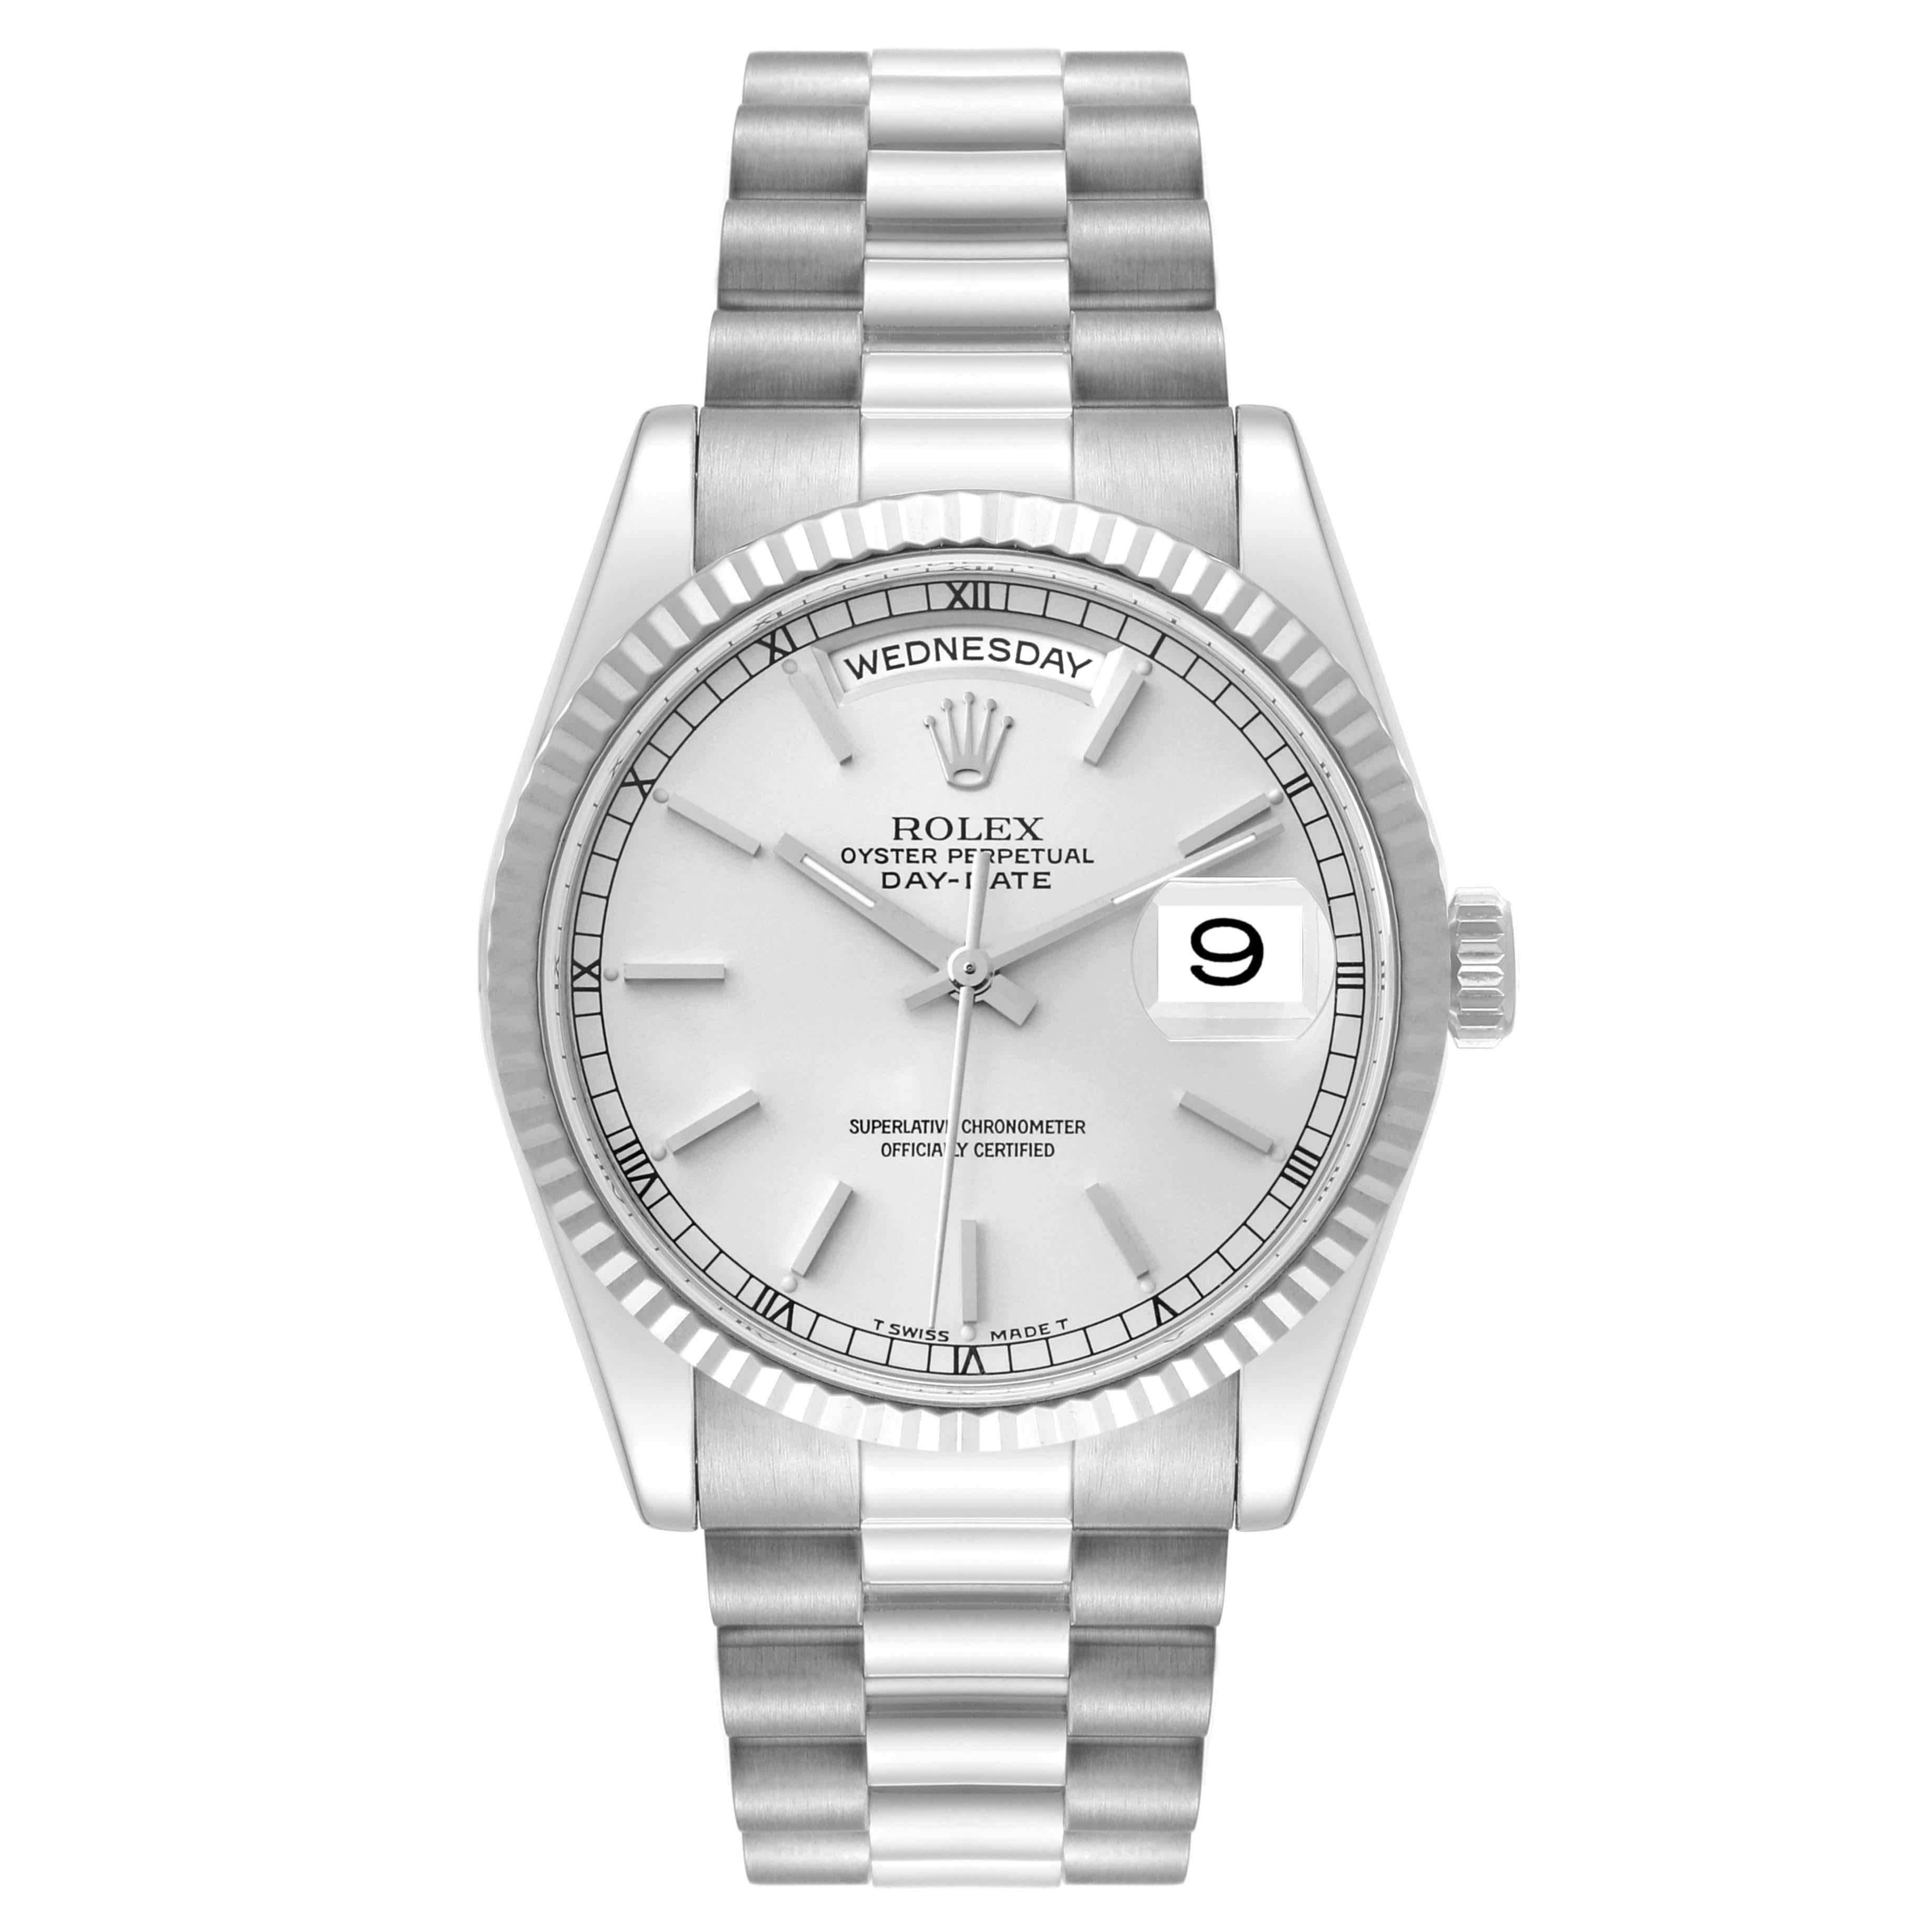 Rolex Day Date President White Gold Silver Dial Mens Watch 118239. Officially certified chronometer self-winding movement. 18k white gold oyster case 36.0 mm in diameter. Rolex logo on a crown. 18k white gold fluted bezel. Scratch resistant sapphire